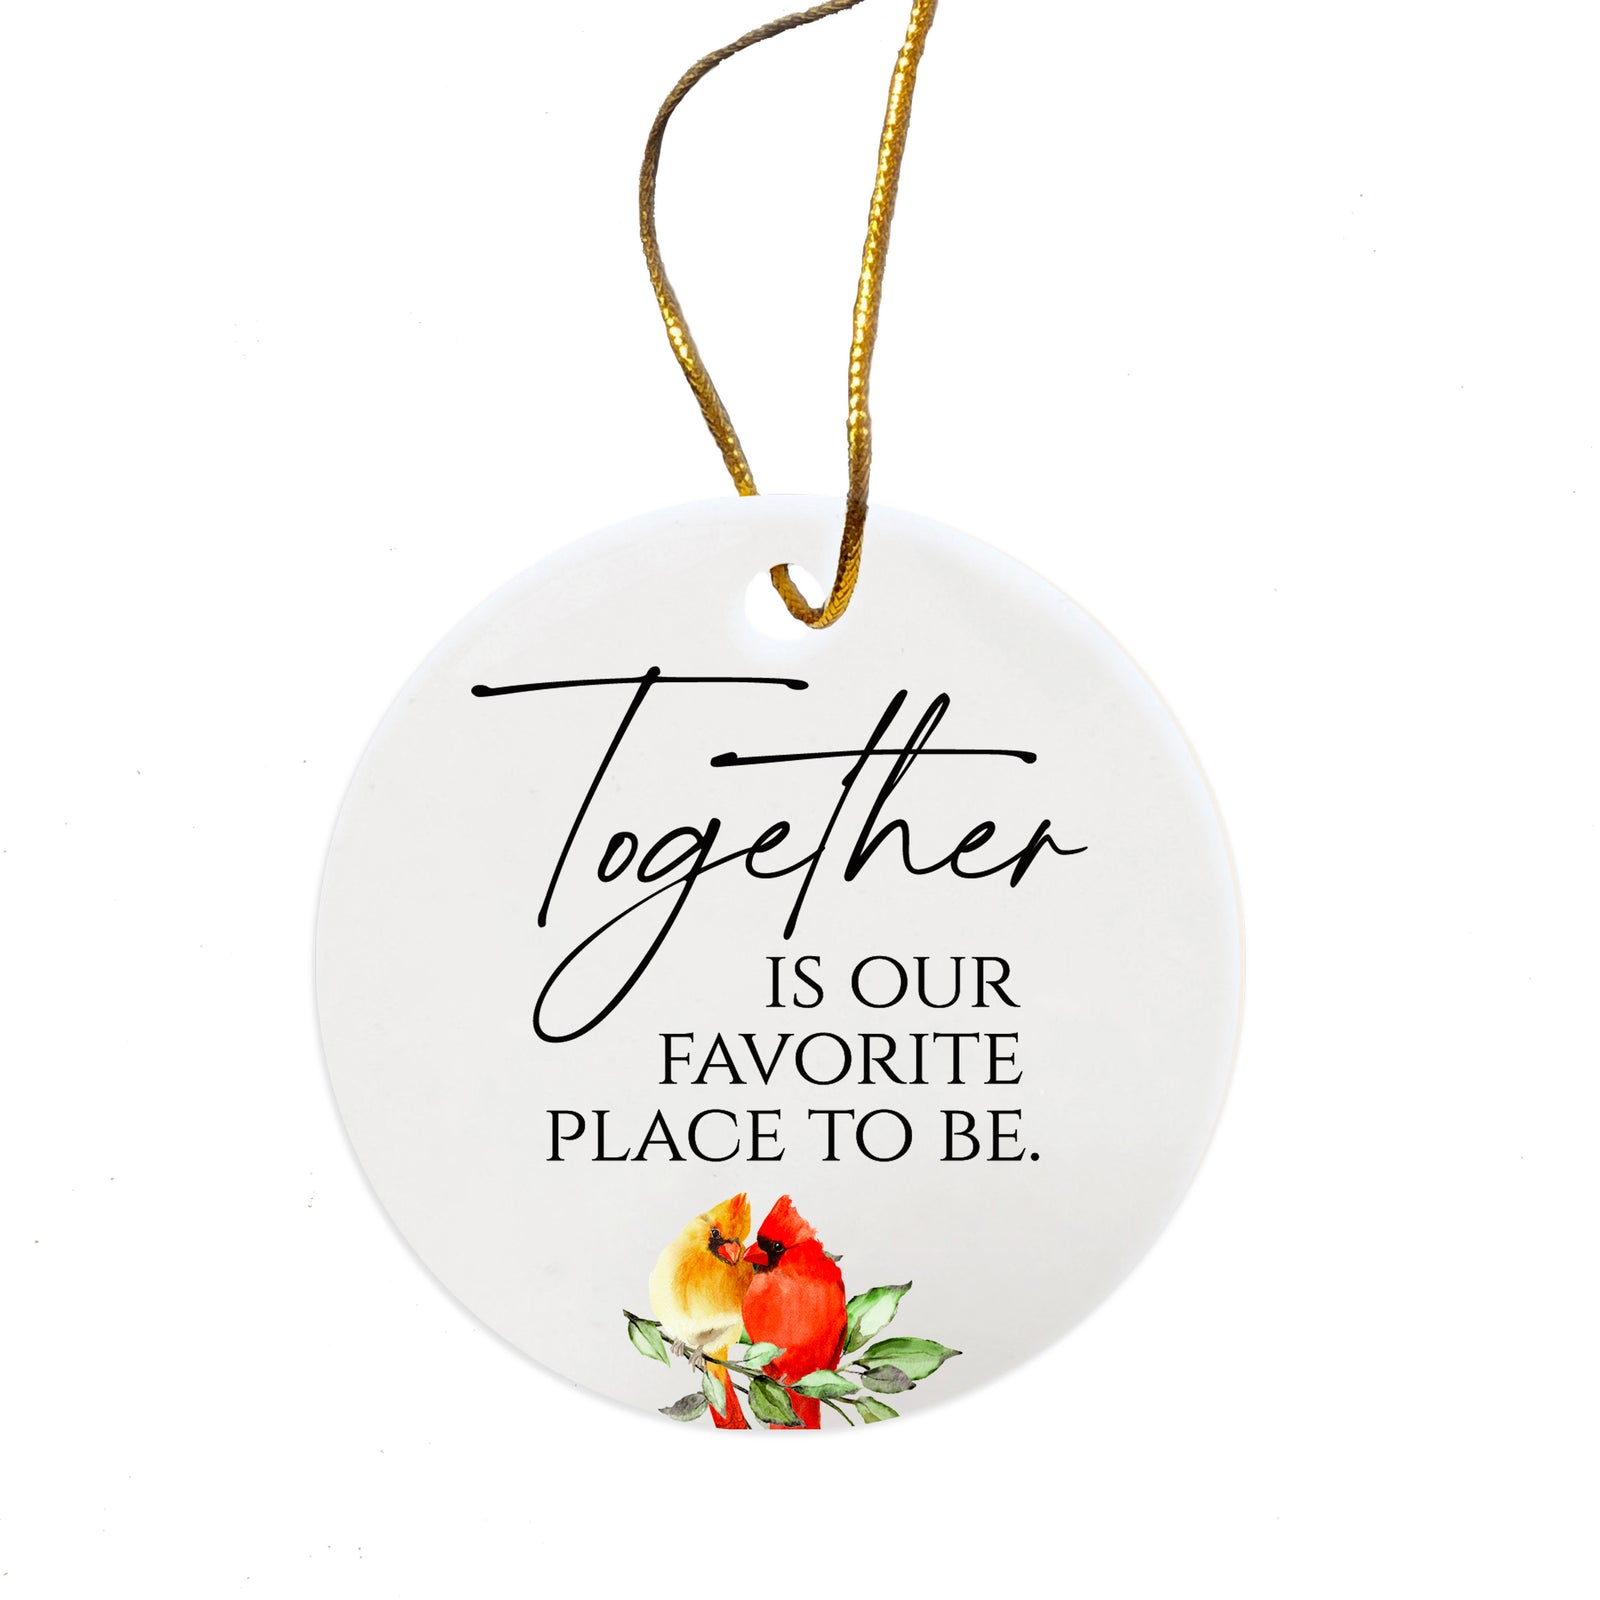 White Ceramic Cardinal Ornament With Everyday Verses Gift Ideas - Together Is Our Favorite Place To Be